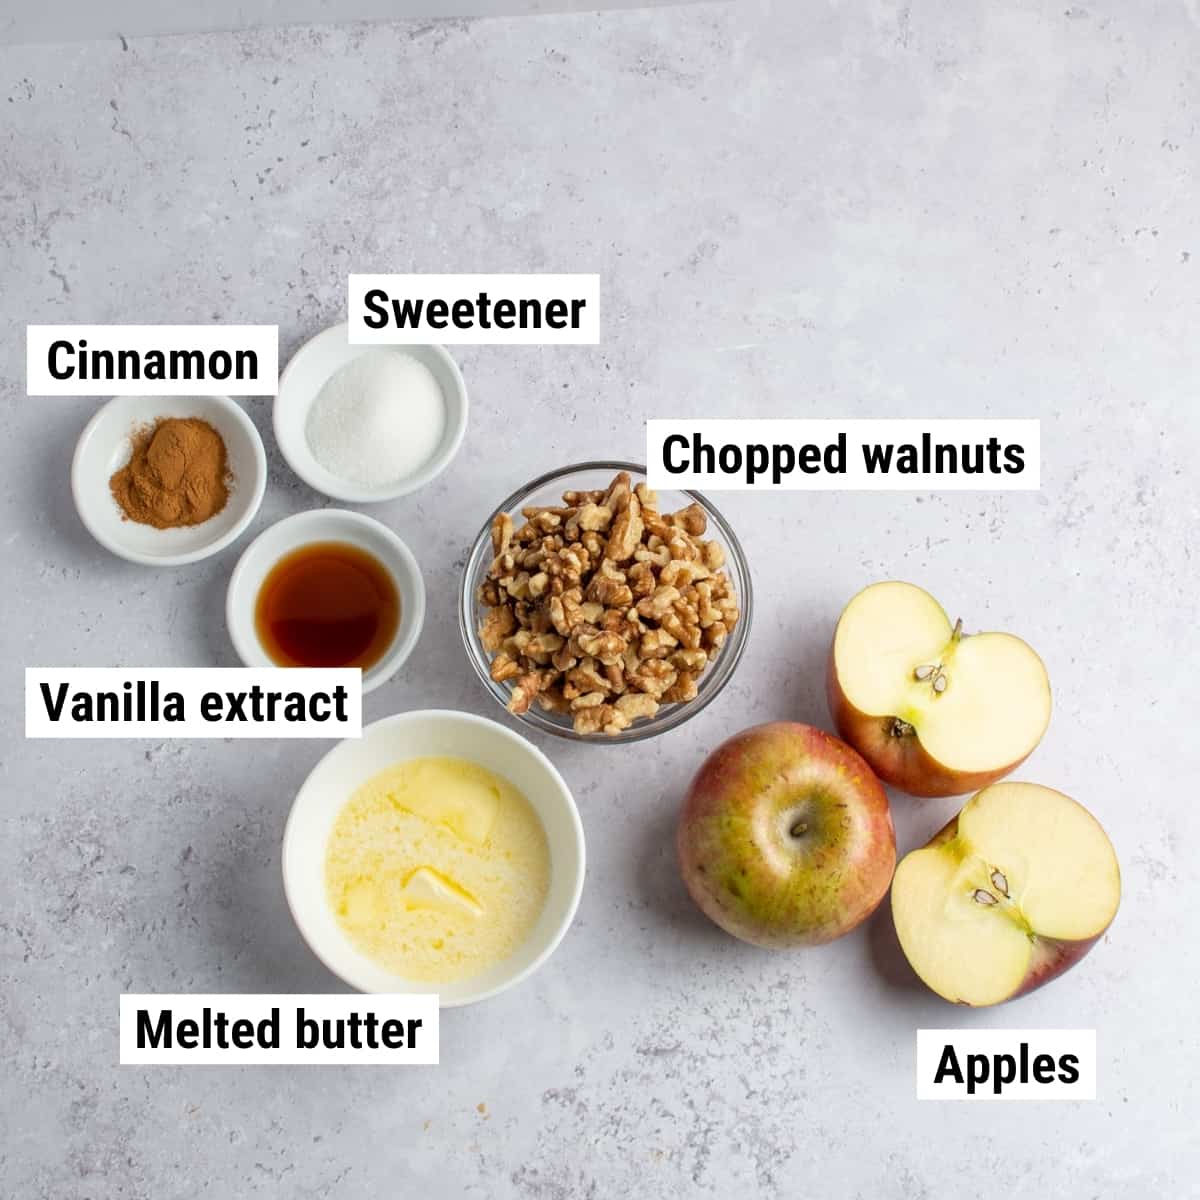 The ingredients used to make keto apple crisp laid out on a table.